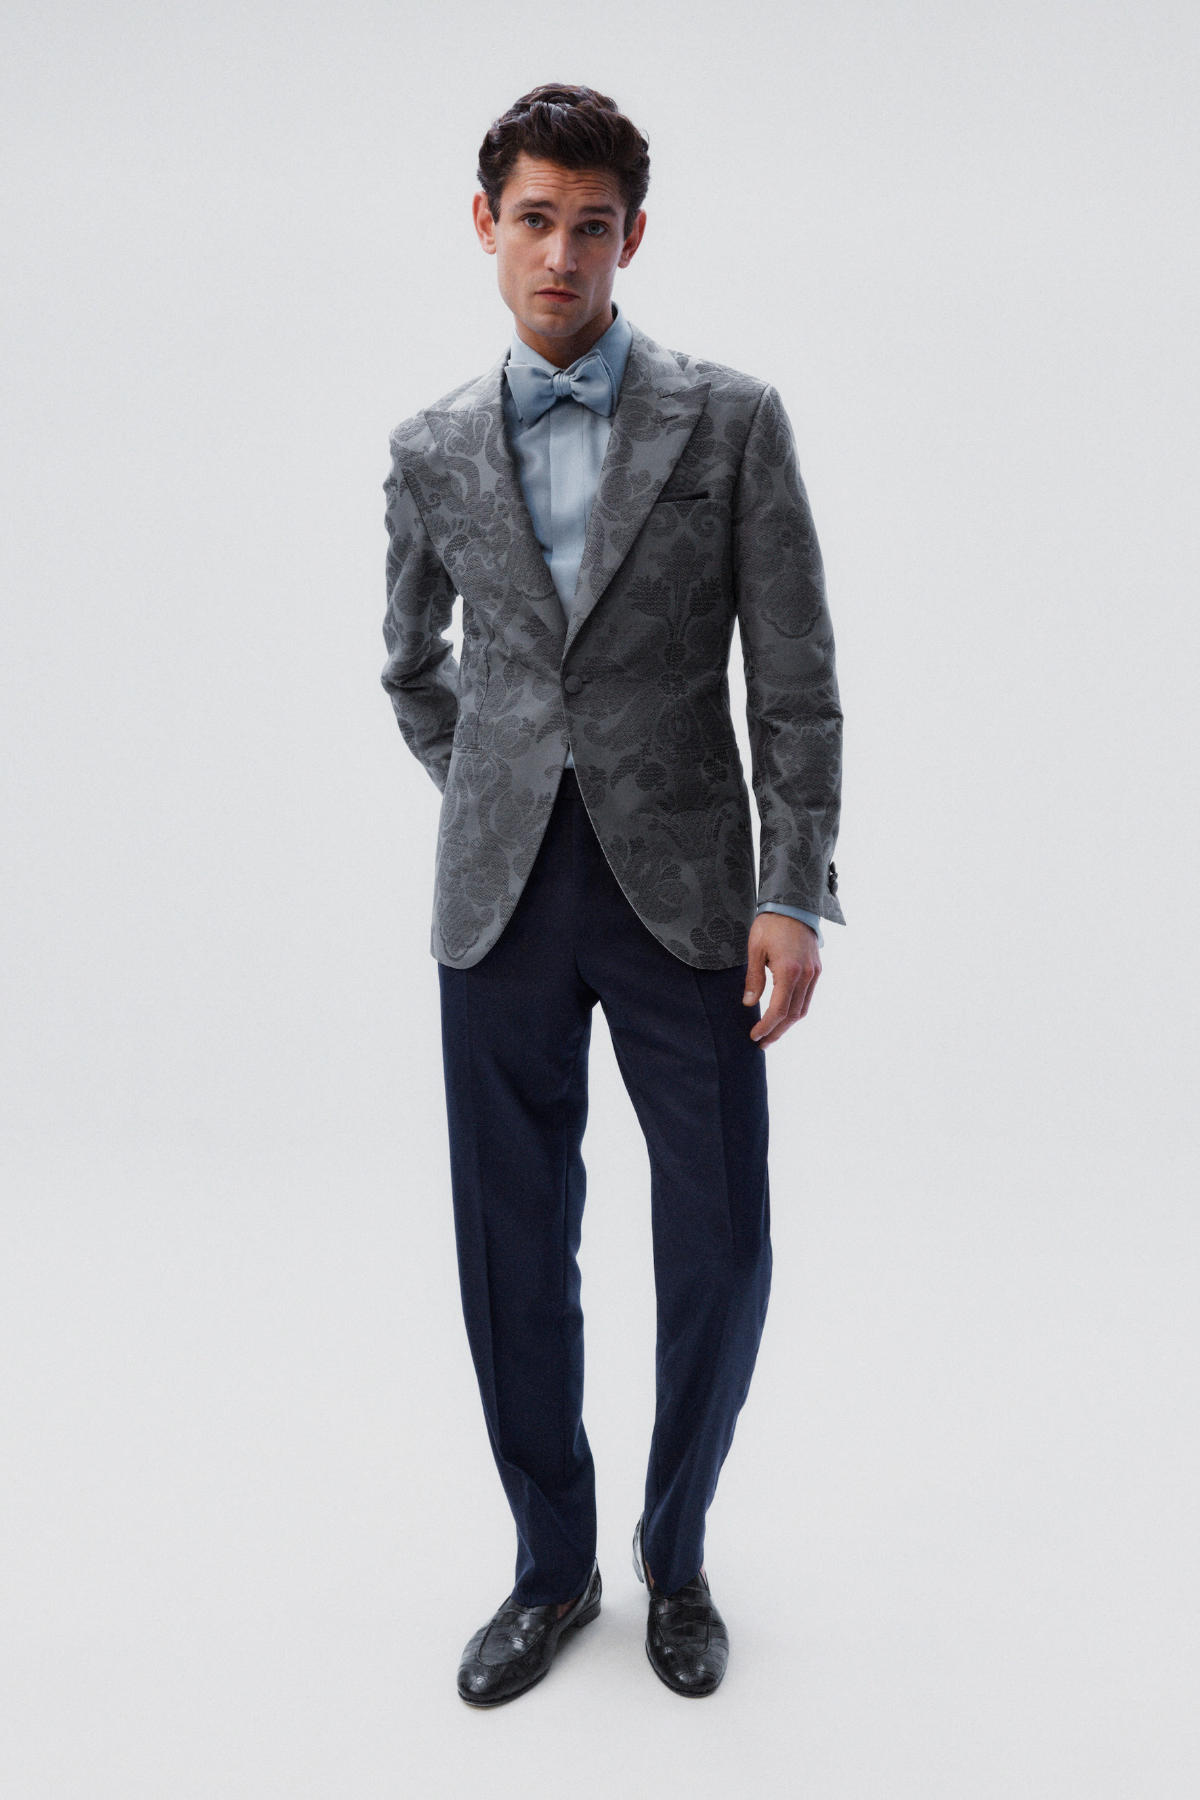 Brioni Presents Its New Spring Summer 2024 Menswear Collection: In The Perspective Of Lightness